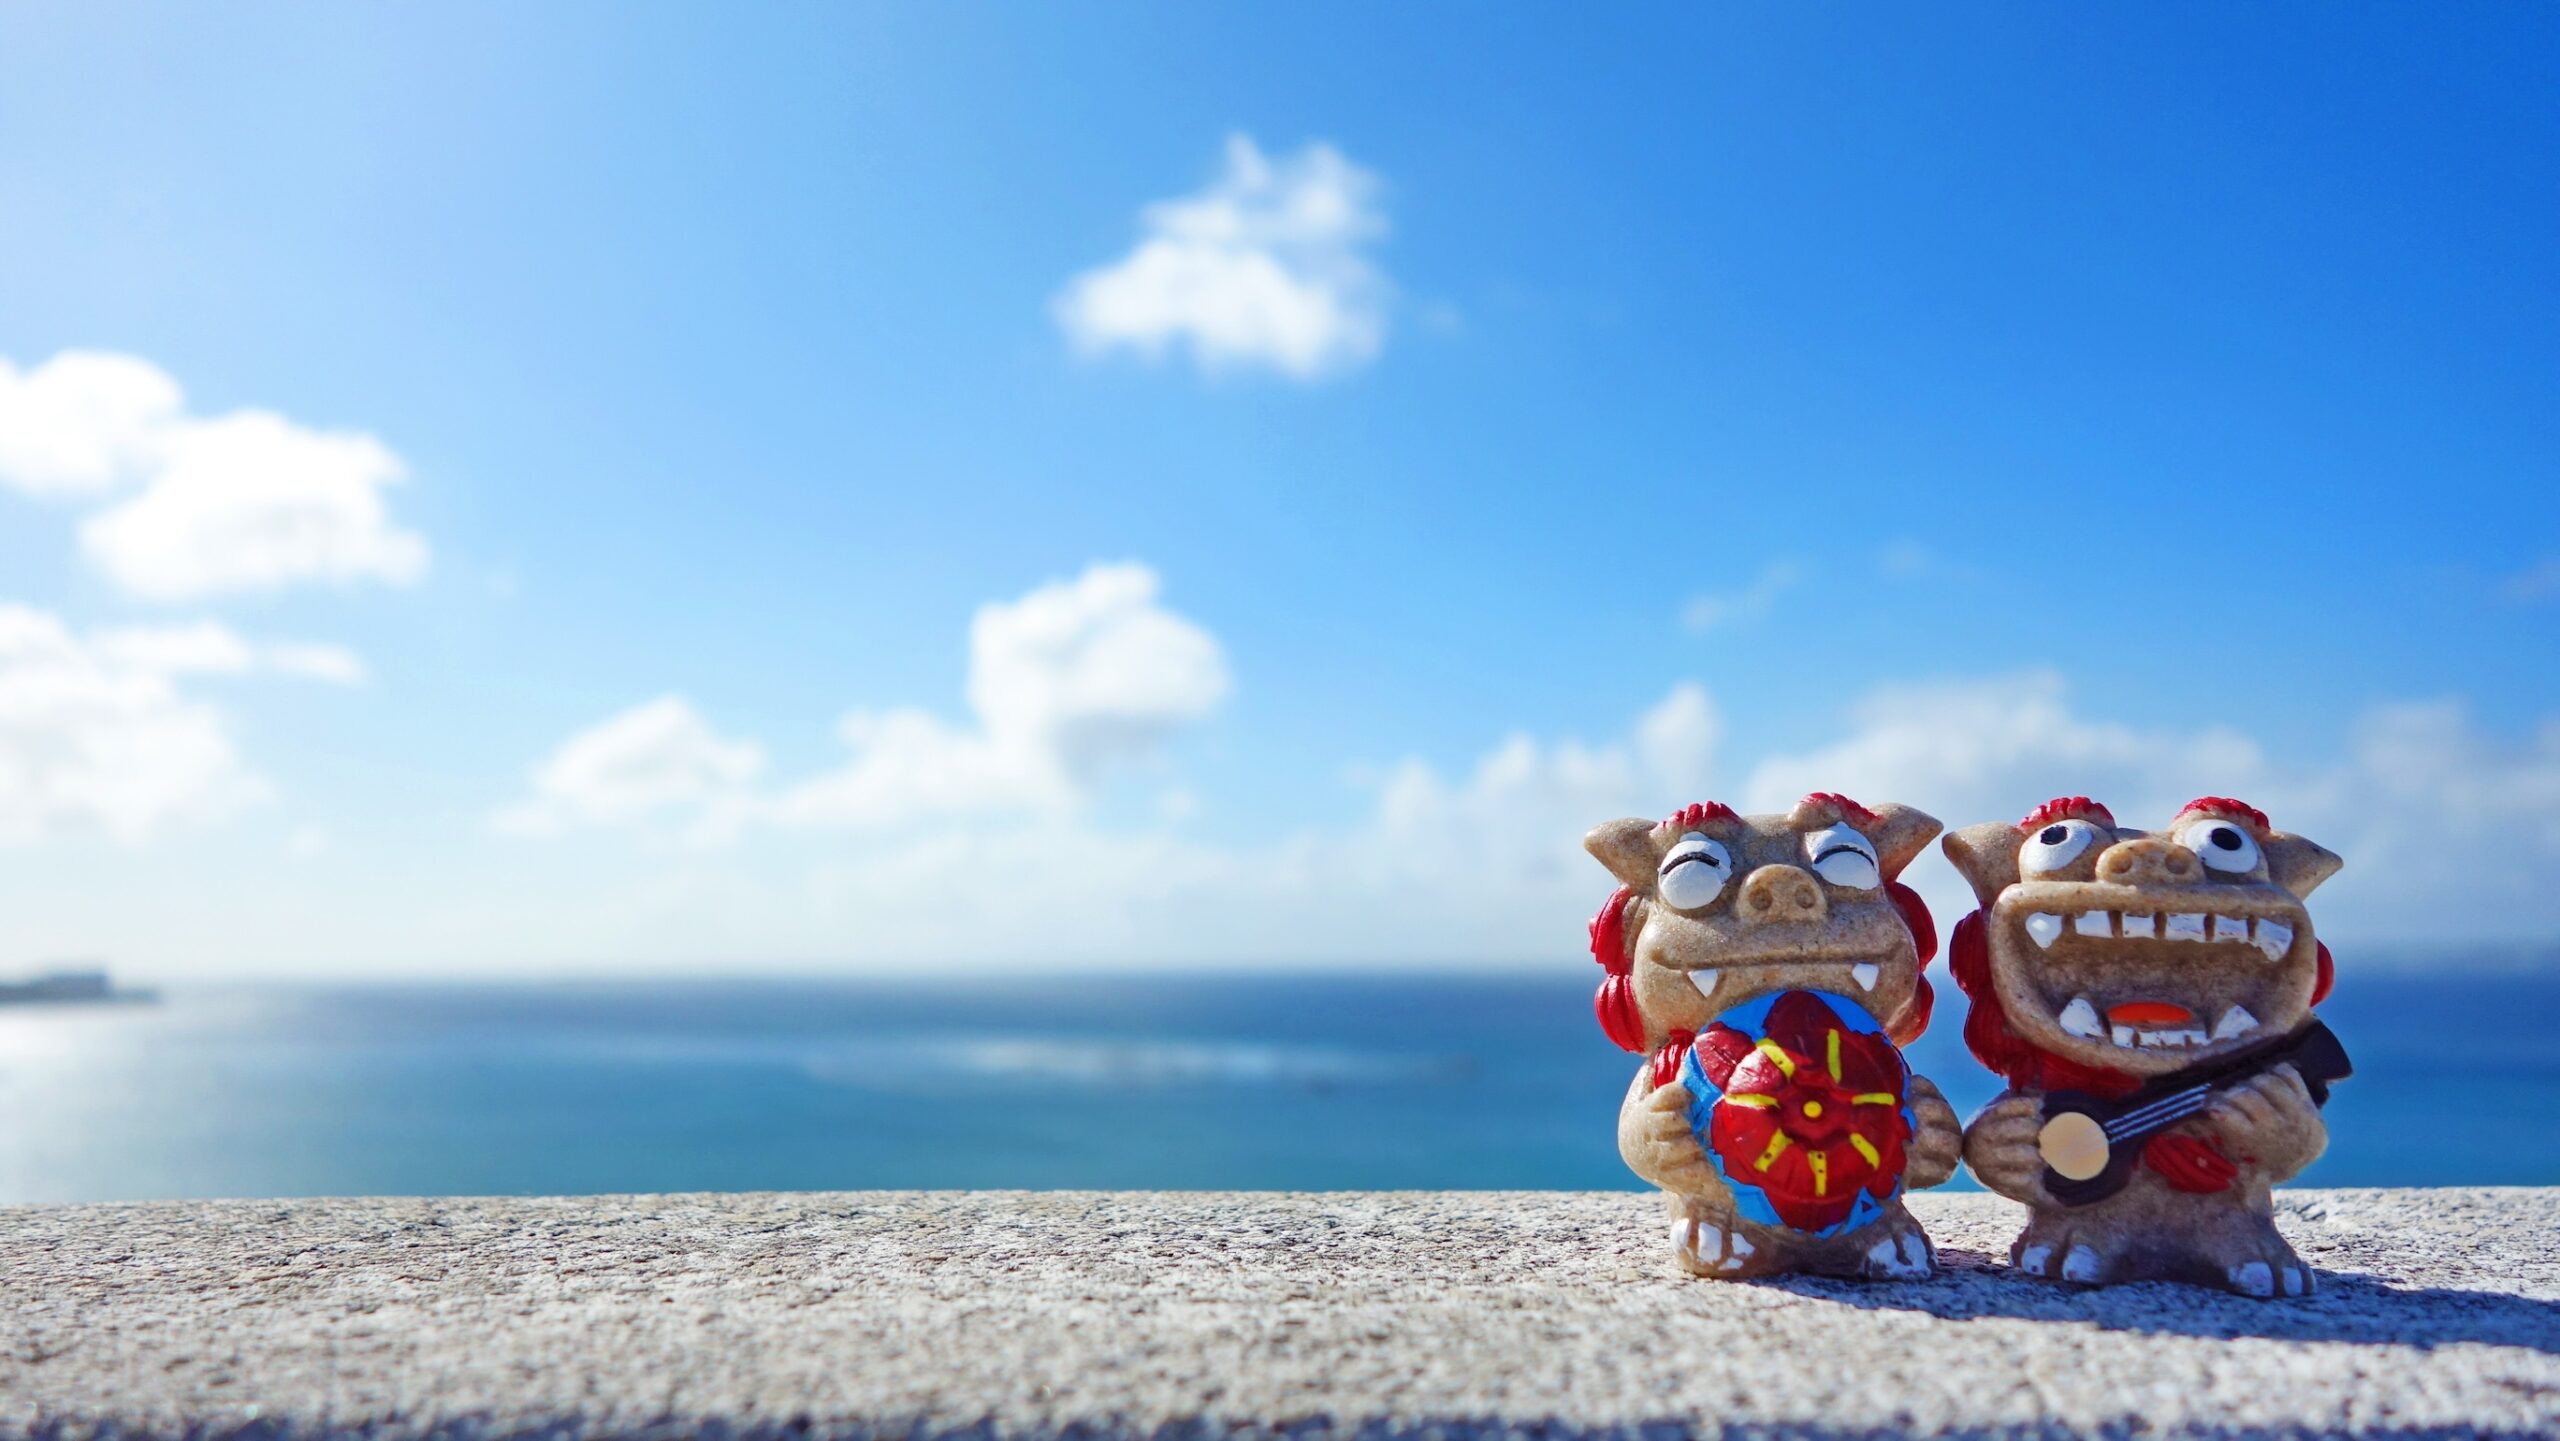 【Okinawa】"How to Truly Relax in Okinawa" - A Guide by Cost-Efficient and Practical Okinawa Locals